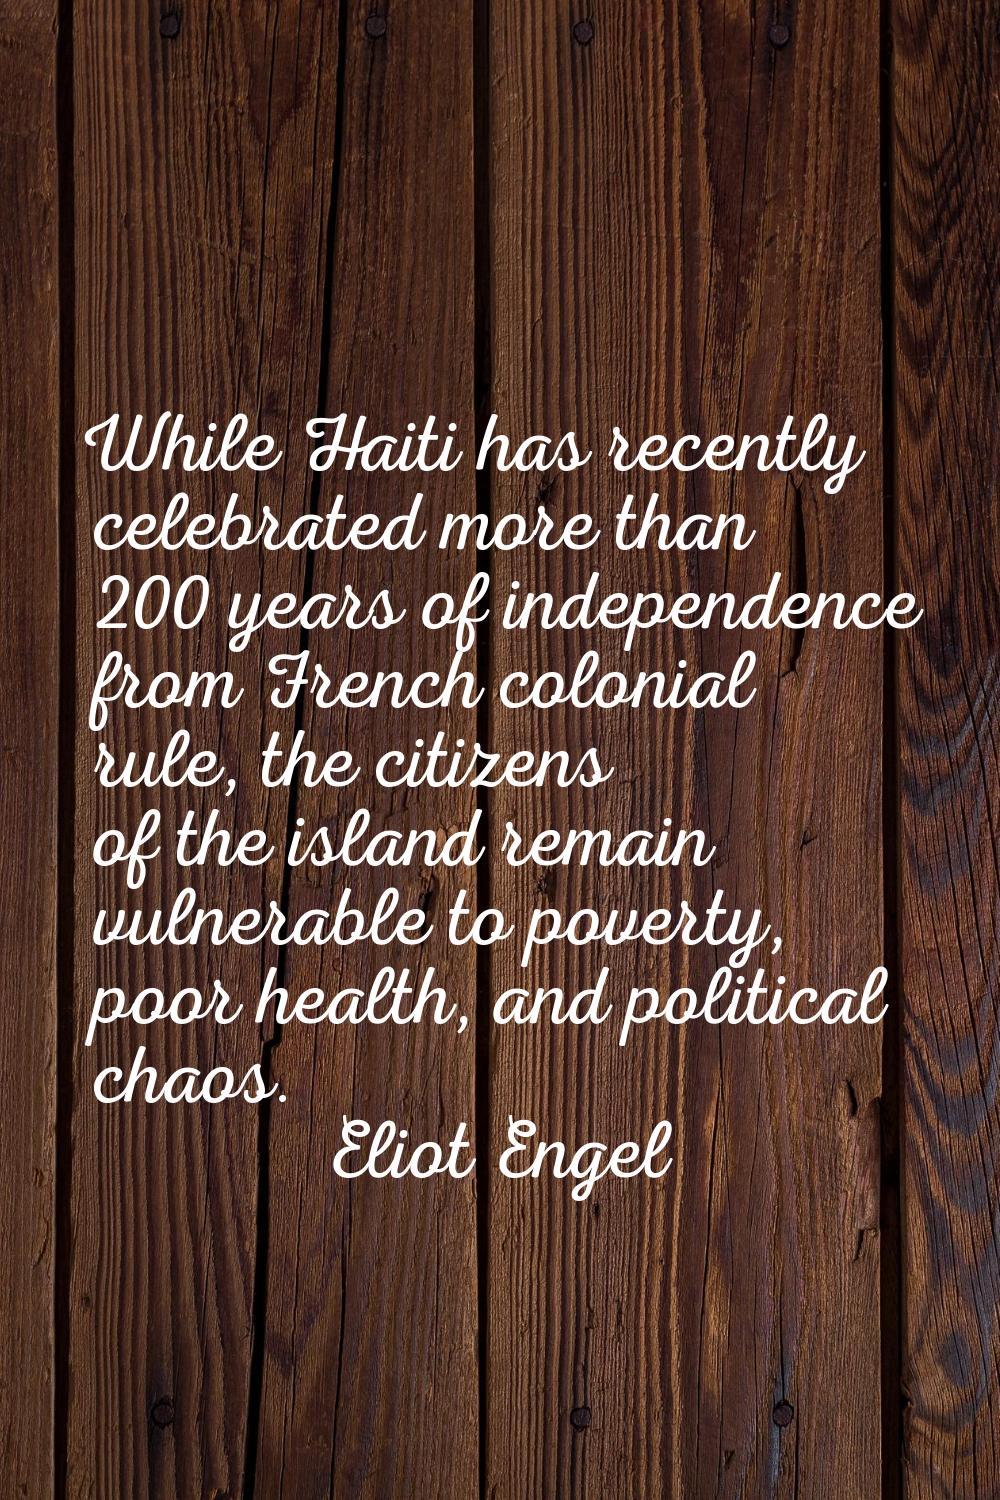 While Haiti has recently celebrated more than 200 years of independence from French colonial rule, 